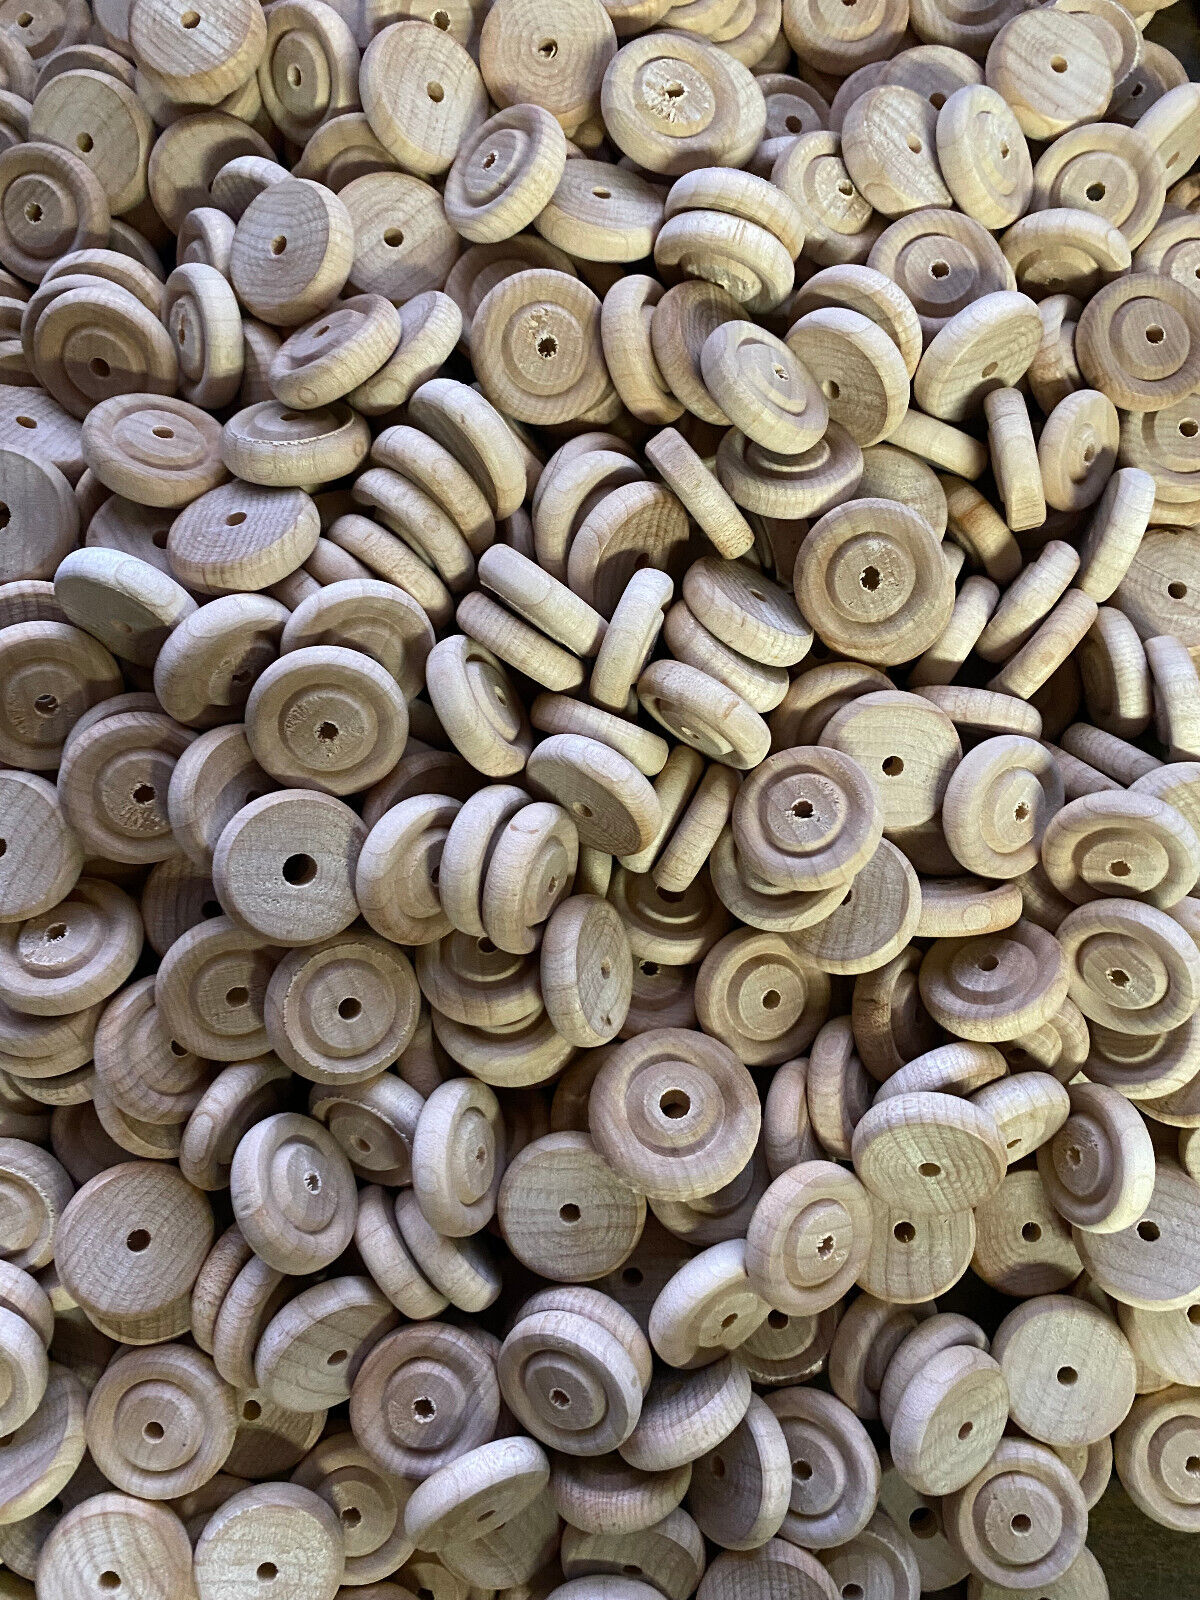 100 Natural 3/4'' Wood Wheels With 1/8'' to 1/4'' Hole- Bird Toy Parts Naynay39 bird toy parts - фотография #2